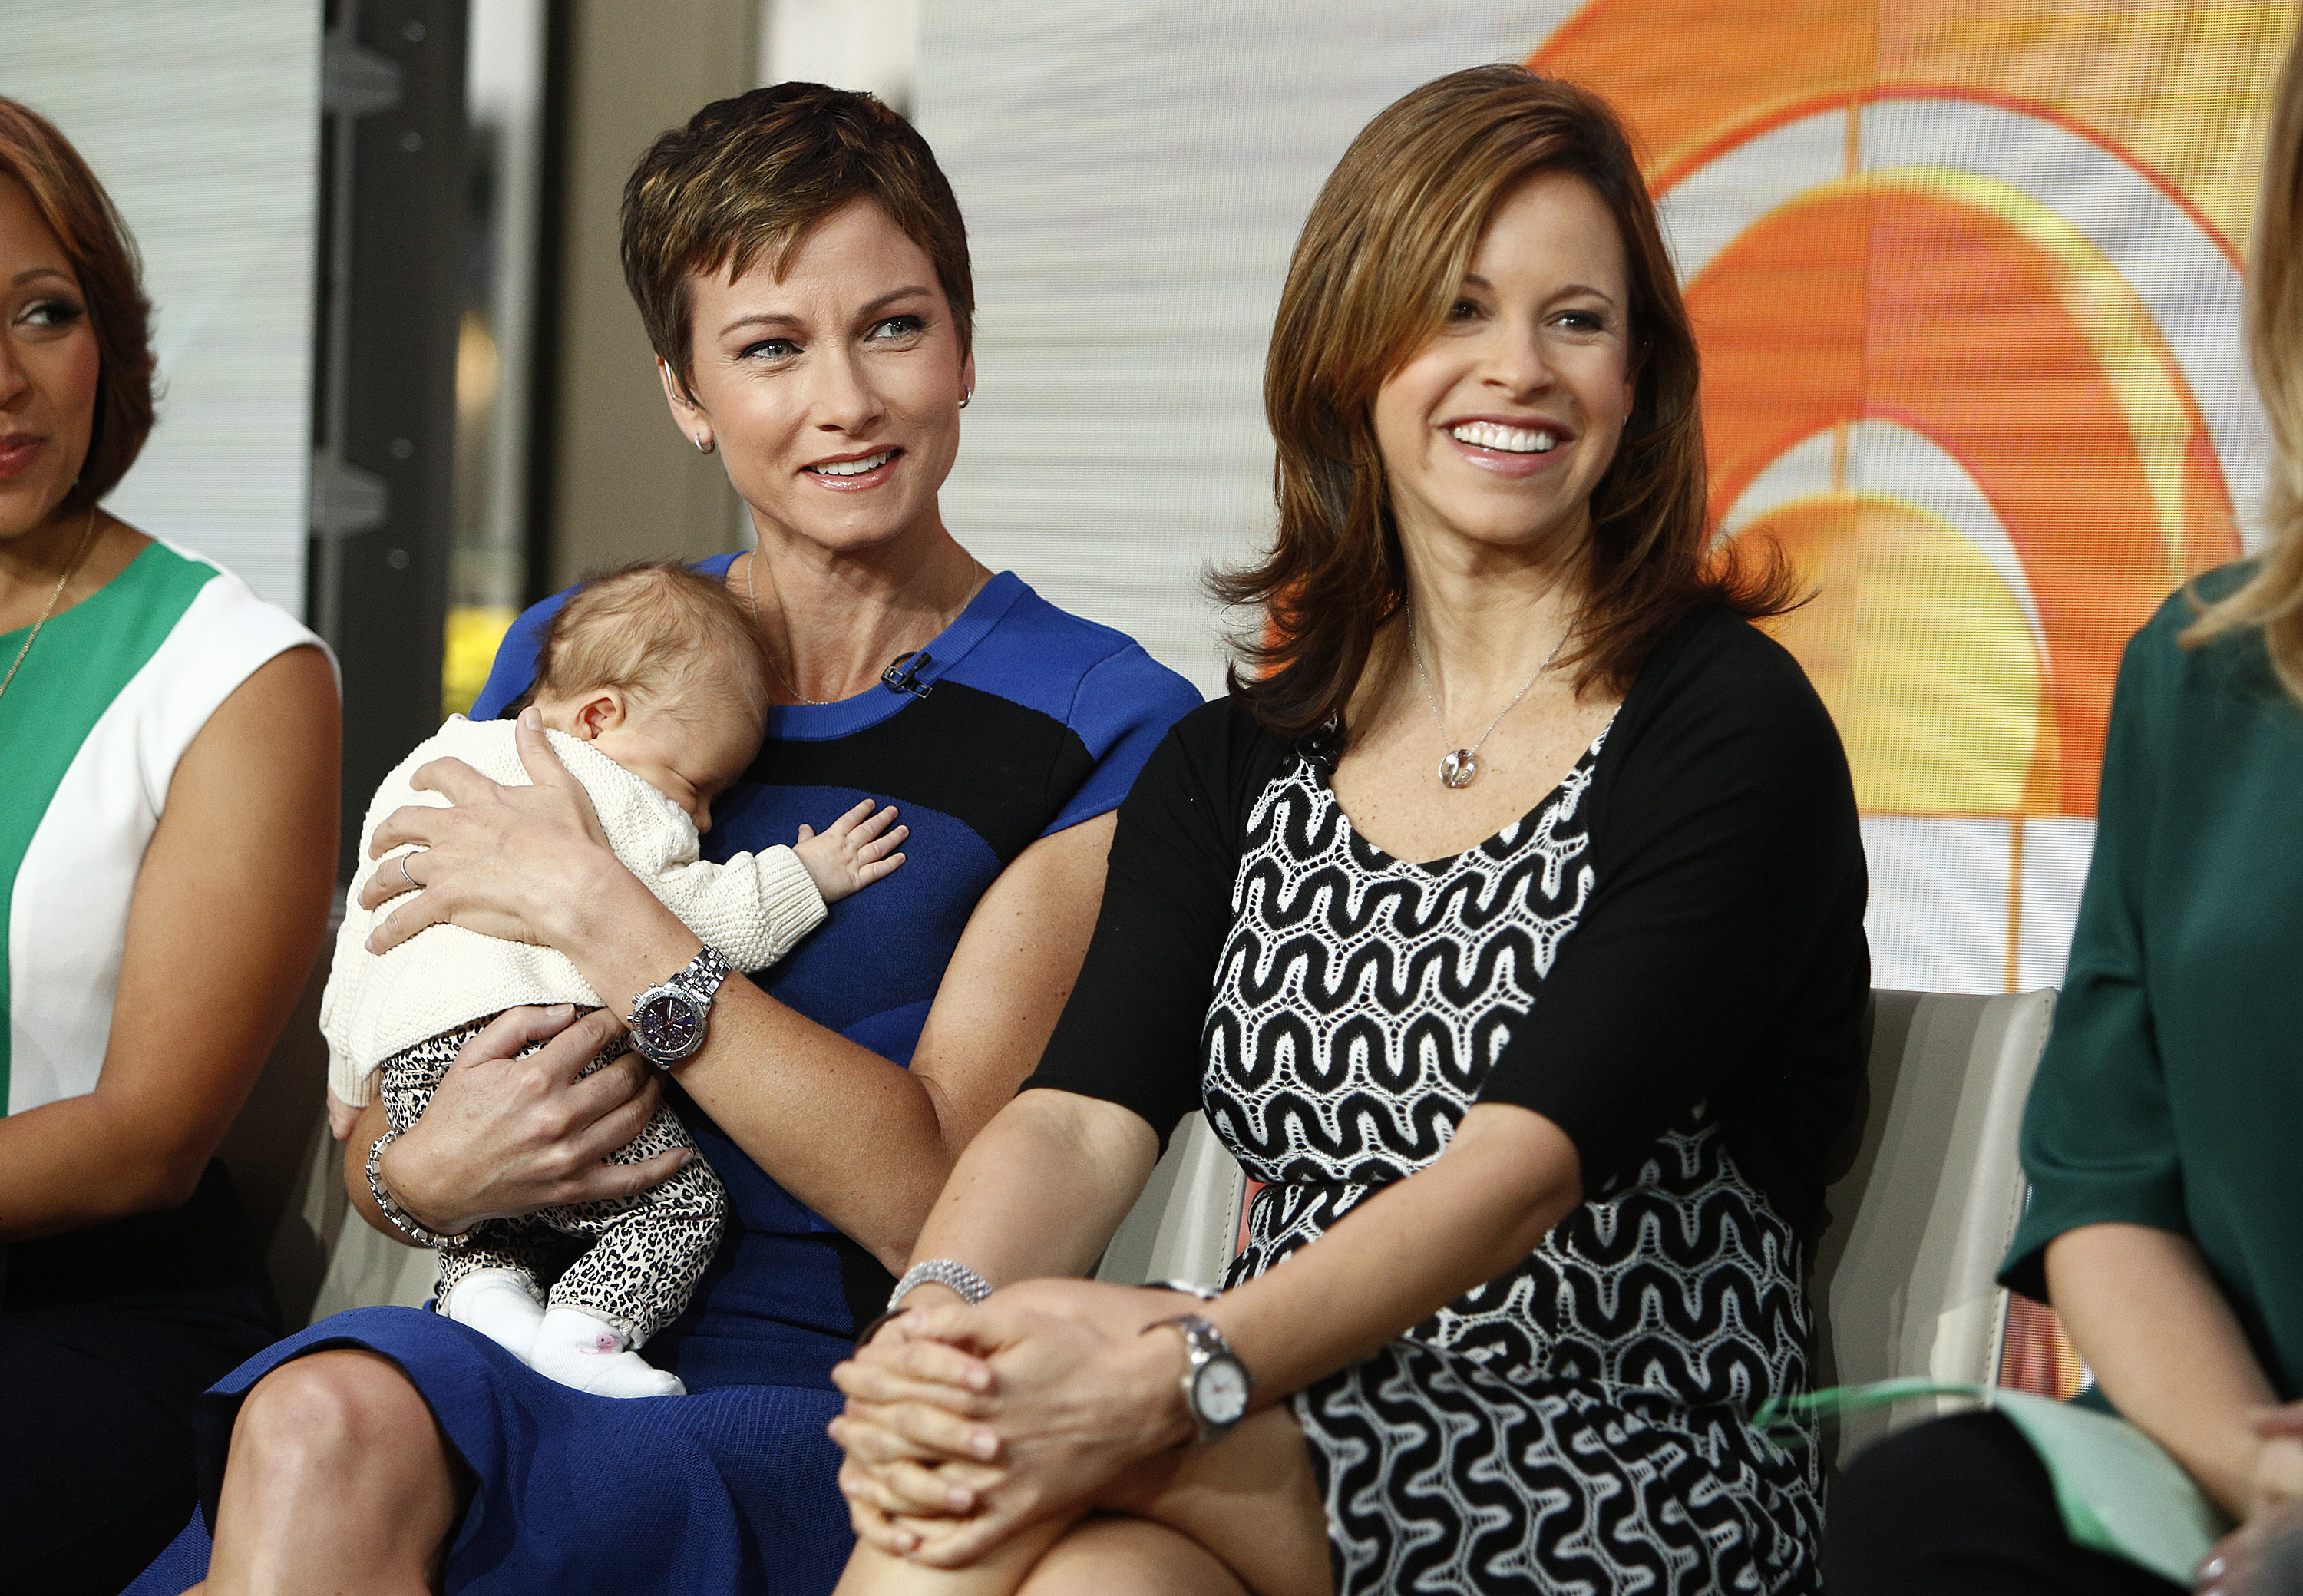 (L-R) Stephanie Gosk and Jenna Wolfe appear on NBC News' "Today" show on September 27, 2013. | Source: Getty Images